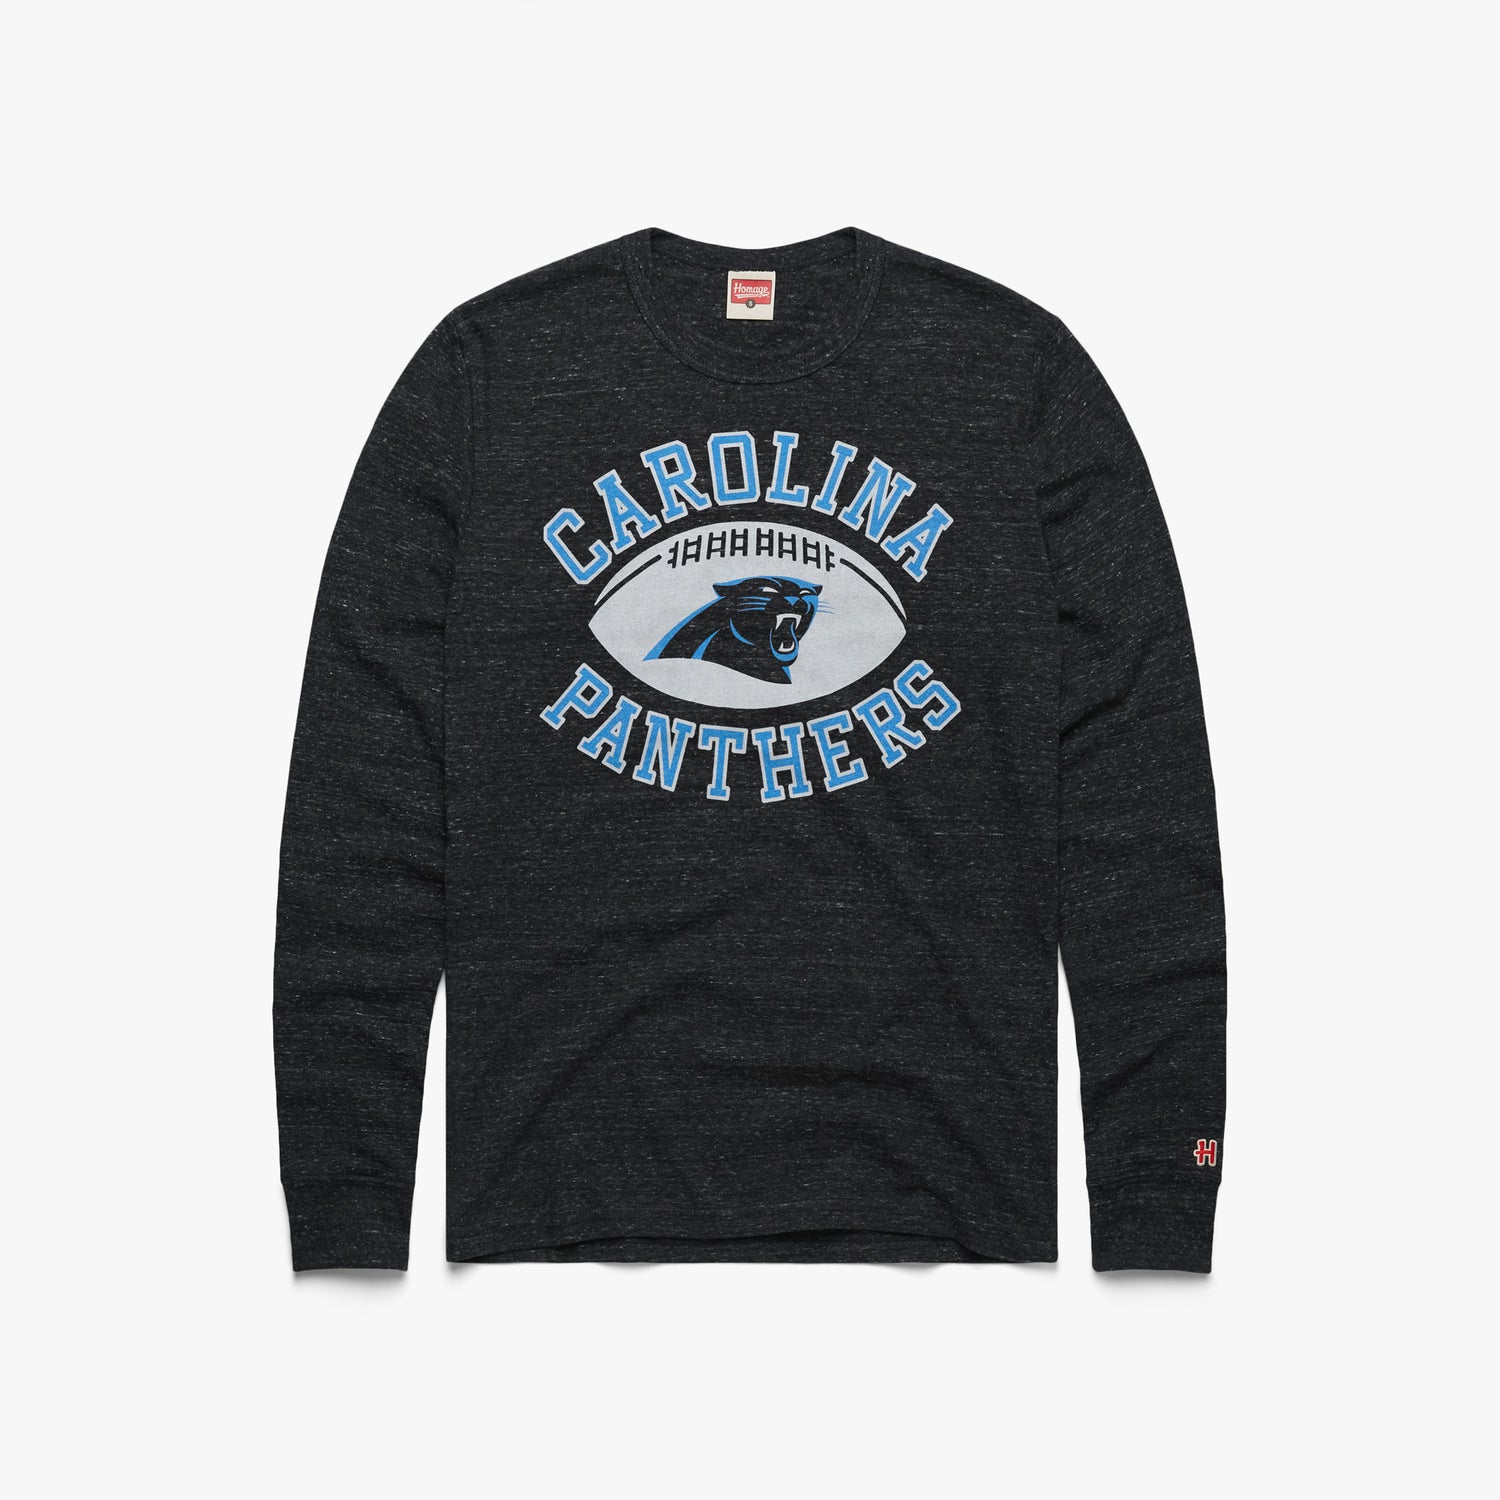 Carolina Panthers Pigskin Long Sleeve Tee from Homage. | Officially Licensed Vintage NFL Apparel from Homage Pro Shop.